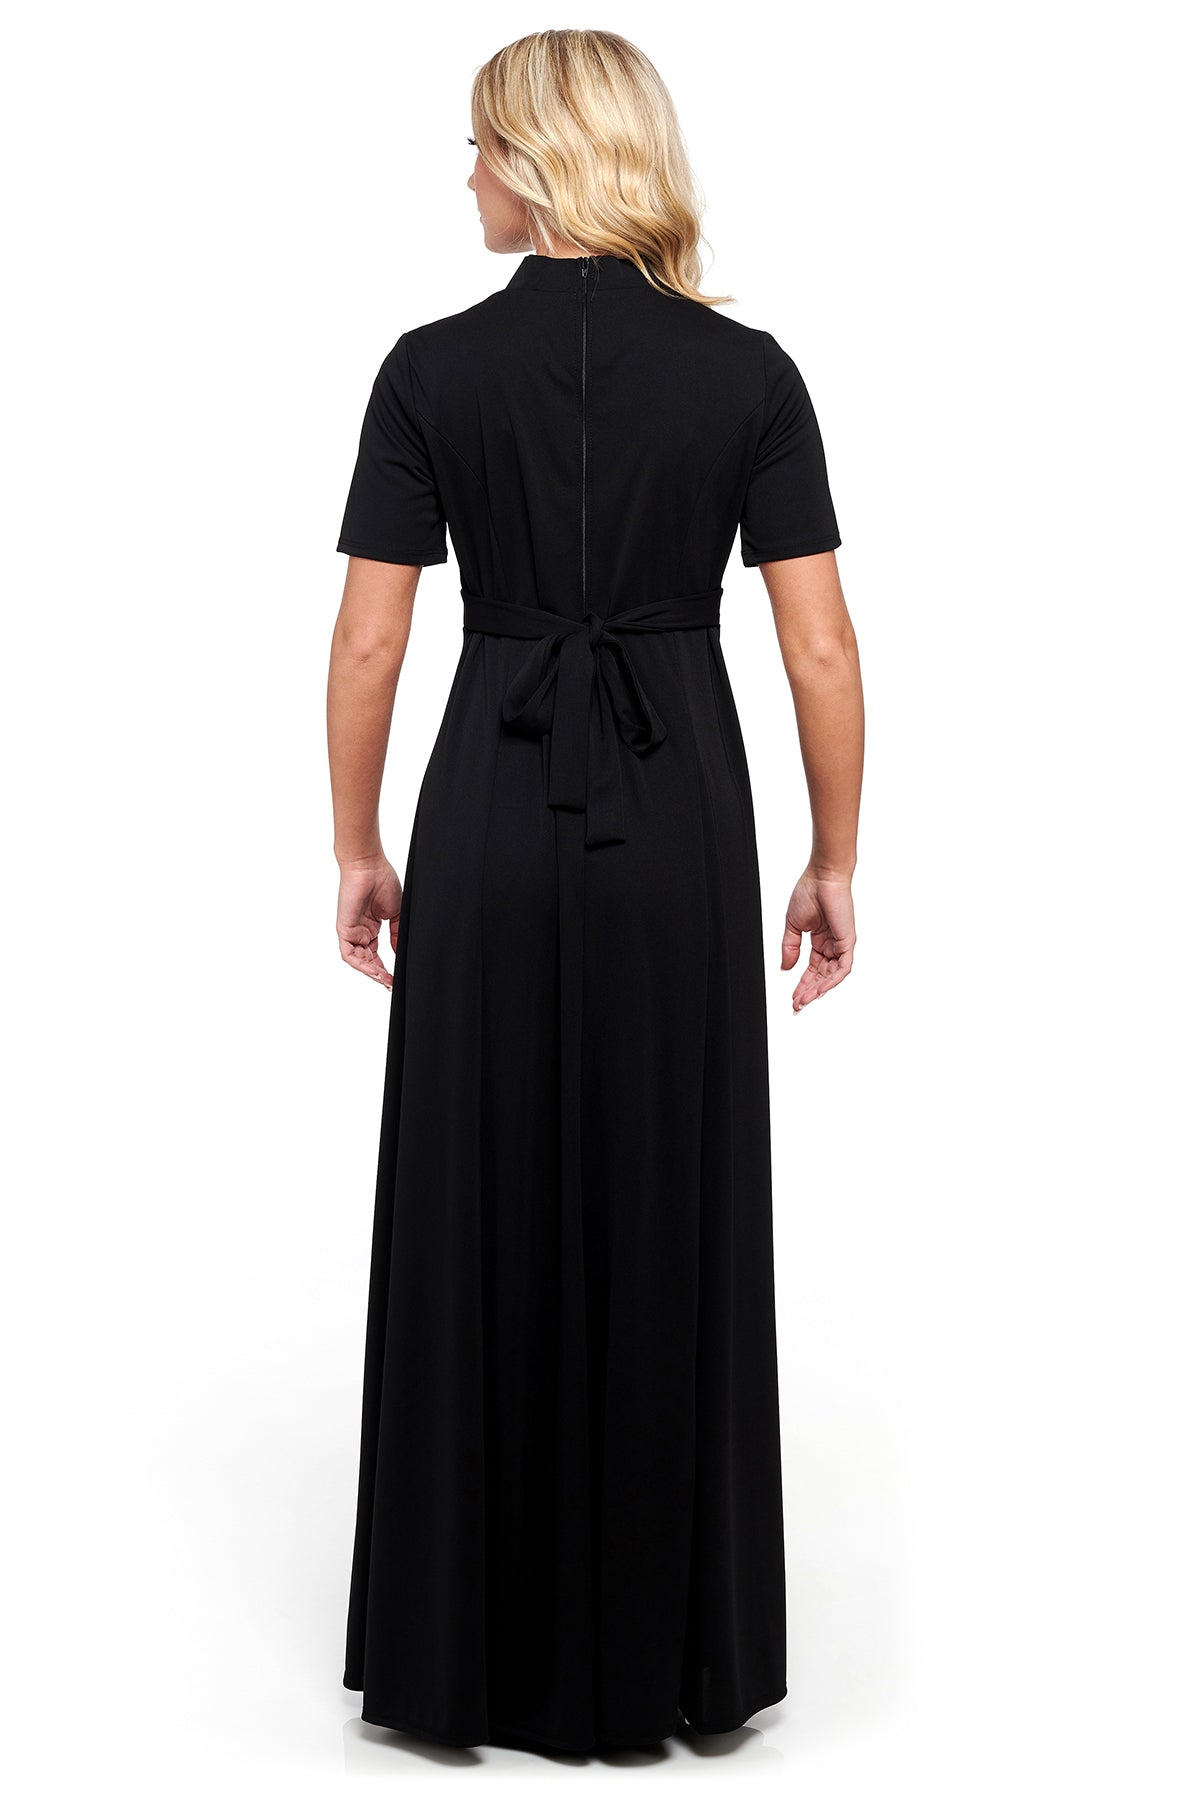 NEW! KACEY (Style #149) - Banded Bow Neck, Short Sleeve Gown